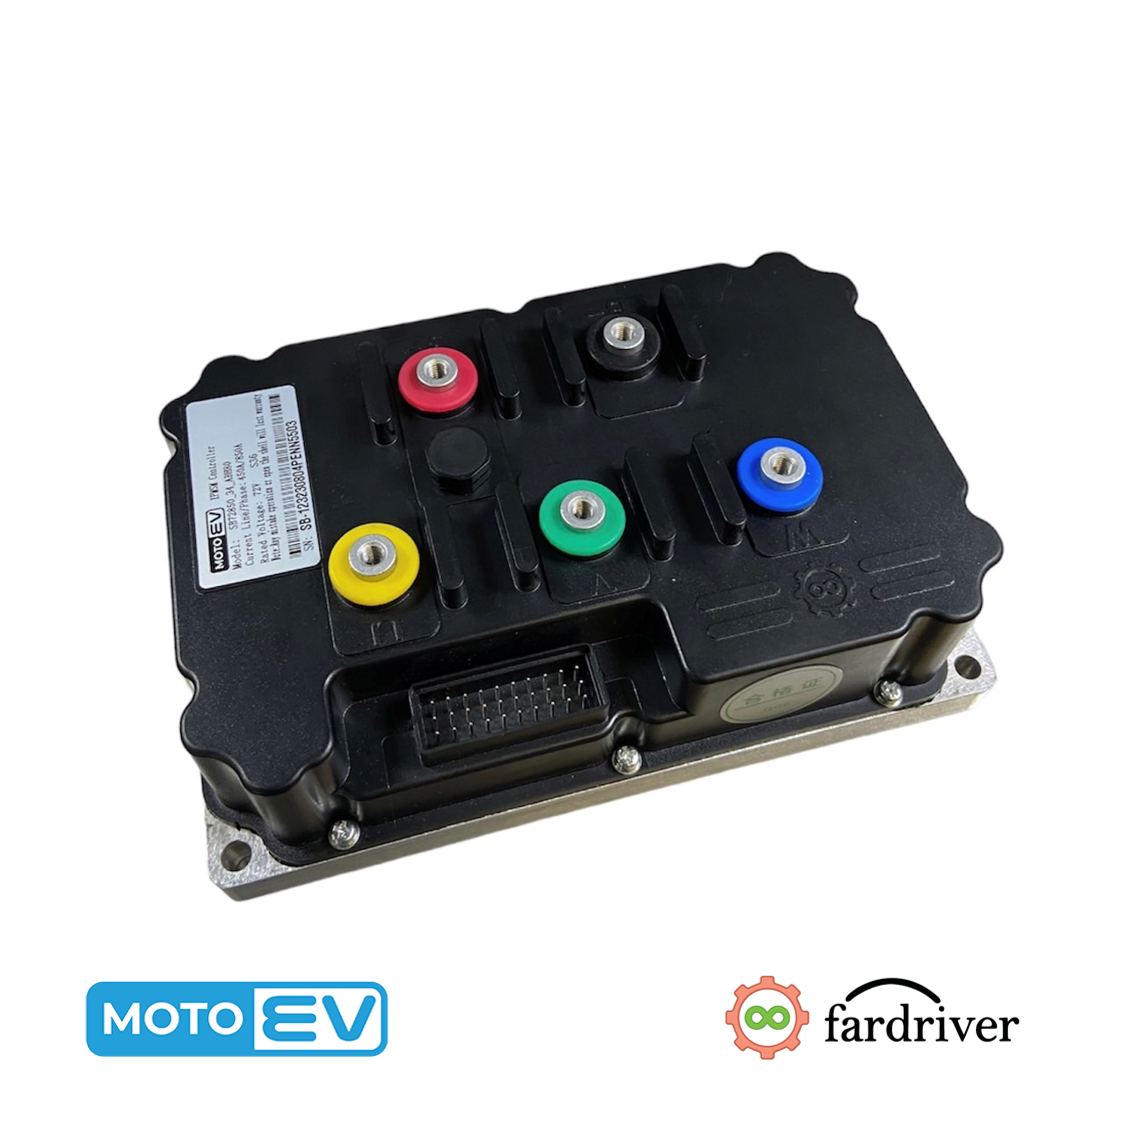 Products New - Moto EV Services and Development